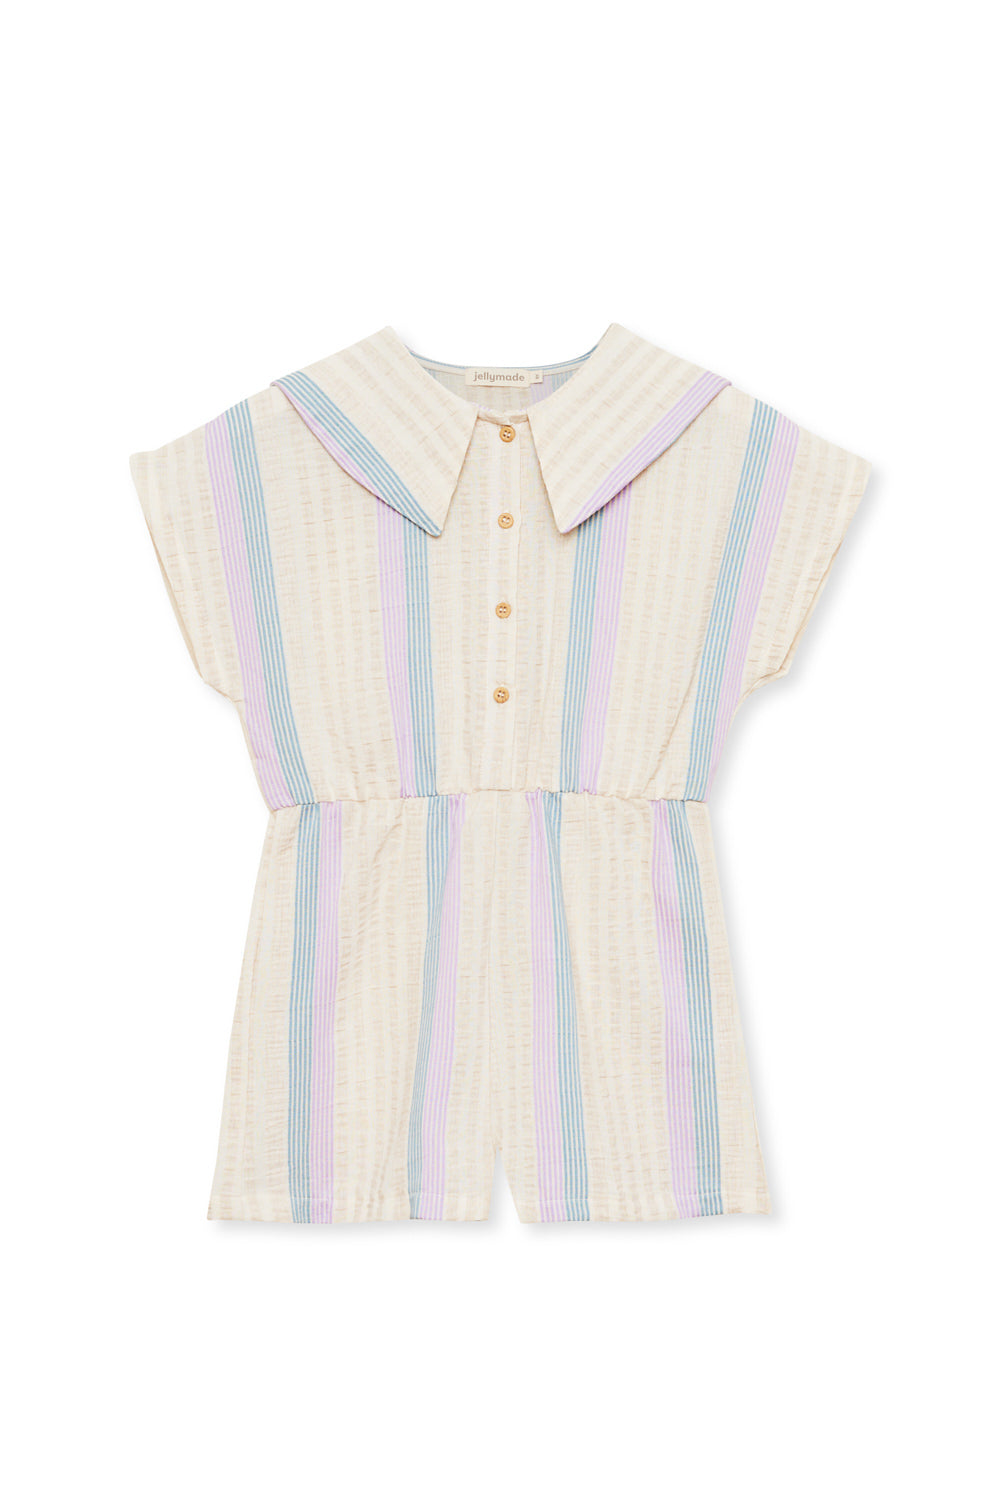 Beebe Overall Stripes Jumpsuits Jellymade 